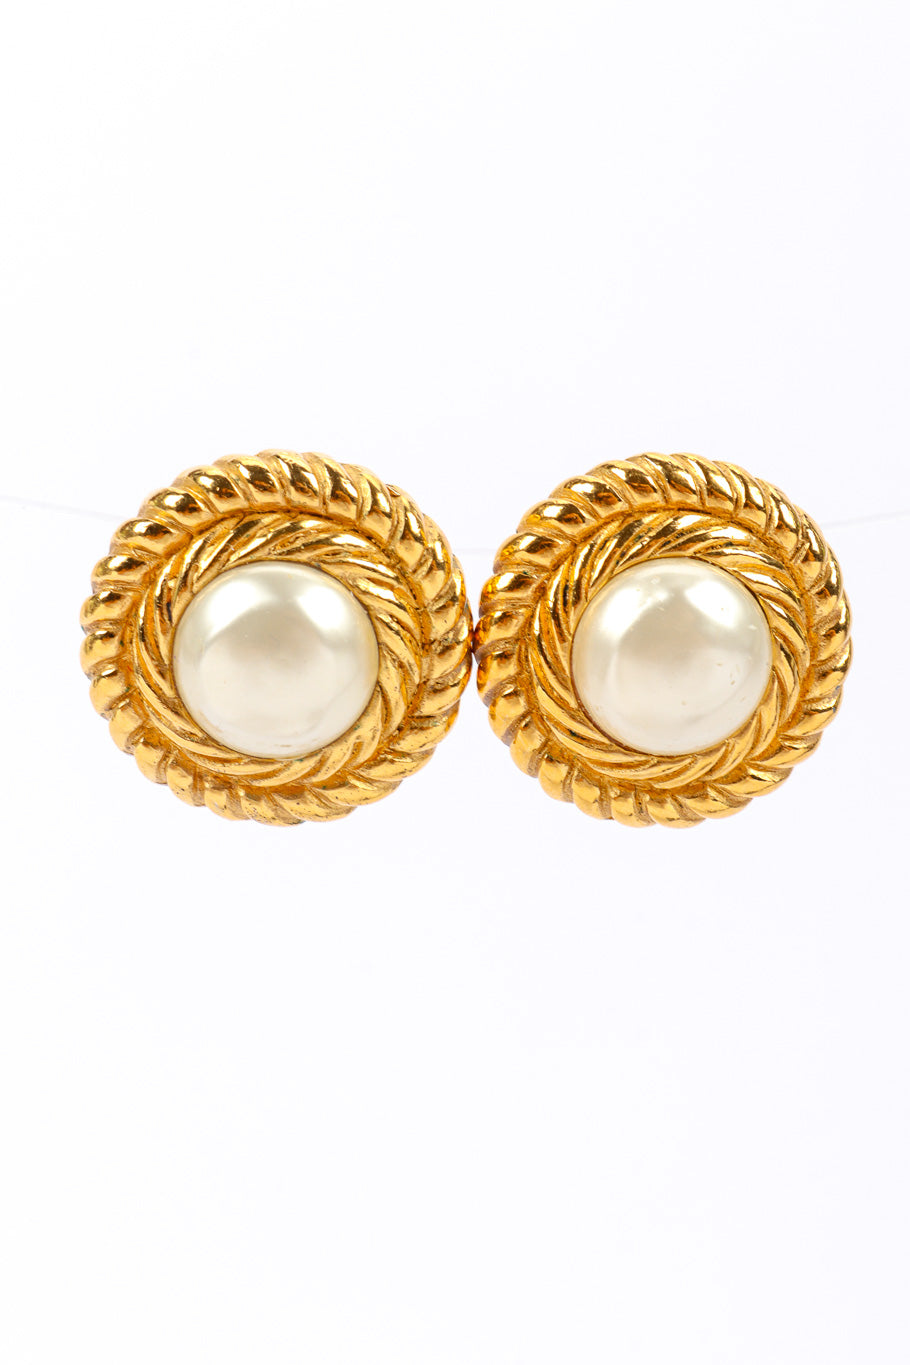 Rope Frame Pearl Earrings by Chanel on white background side by side @recessla